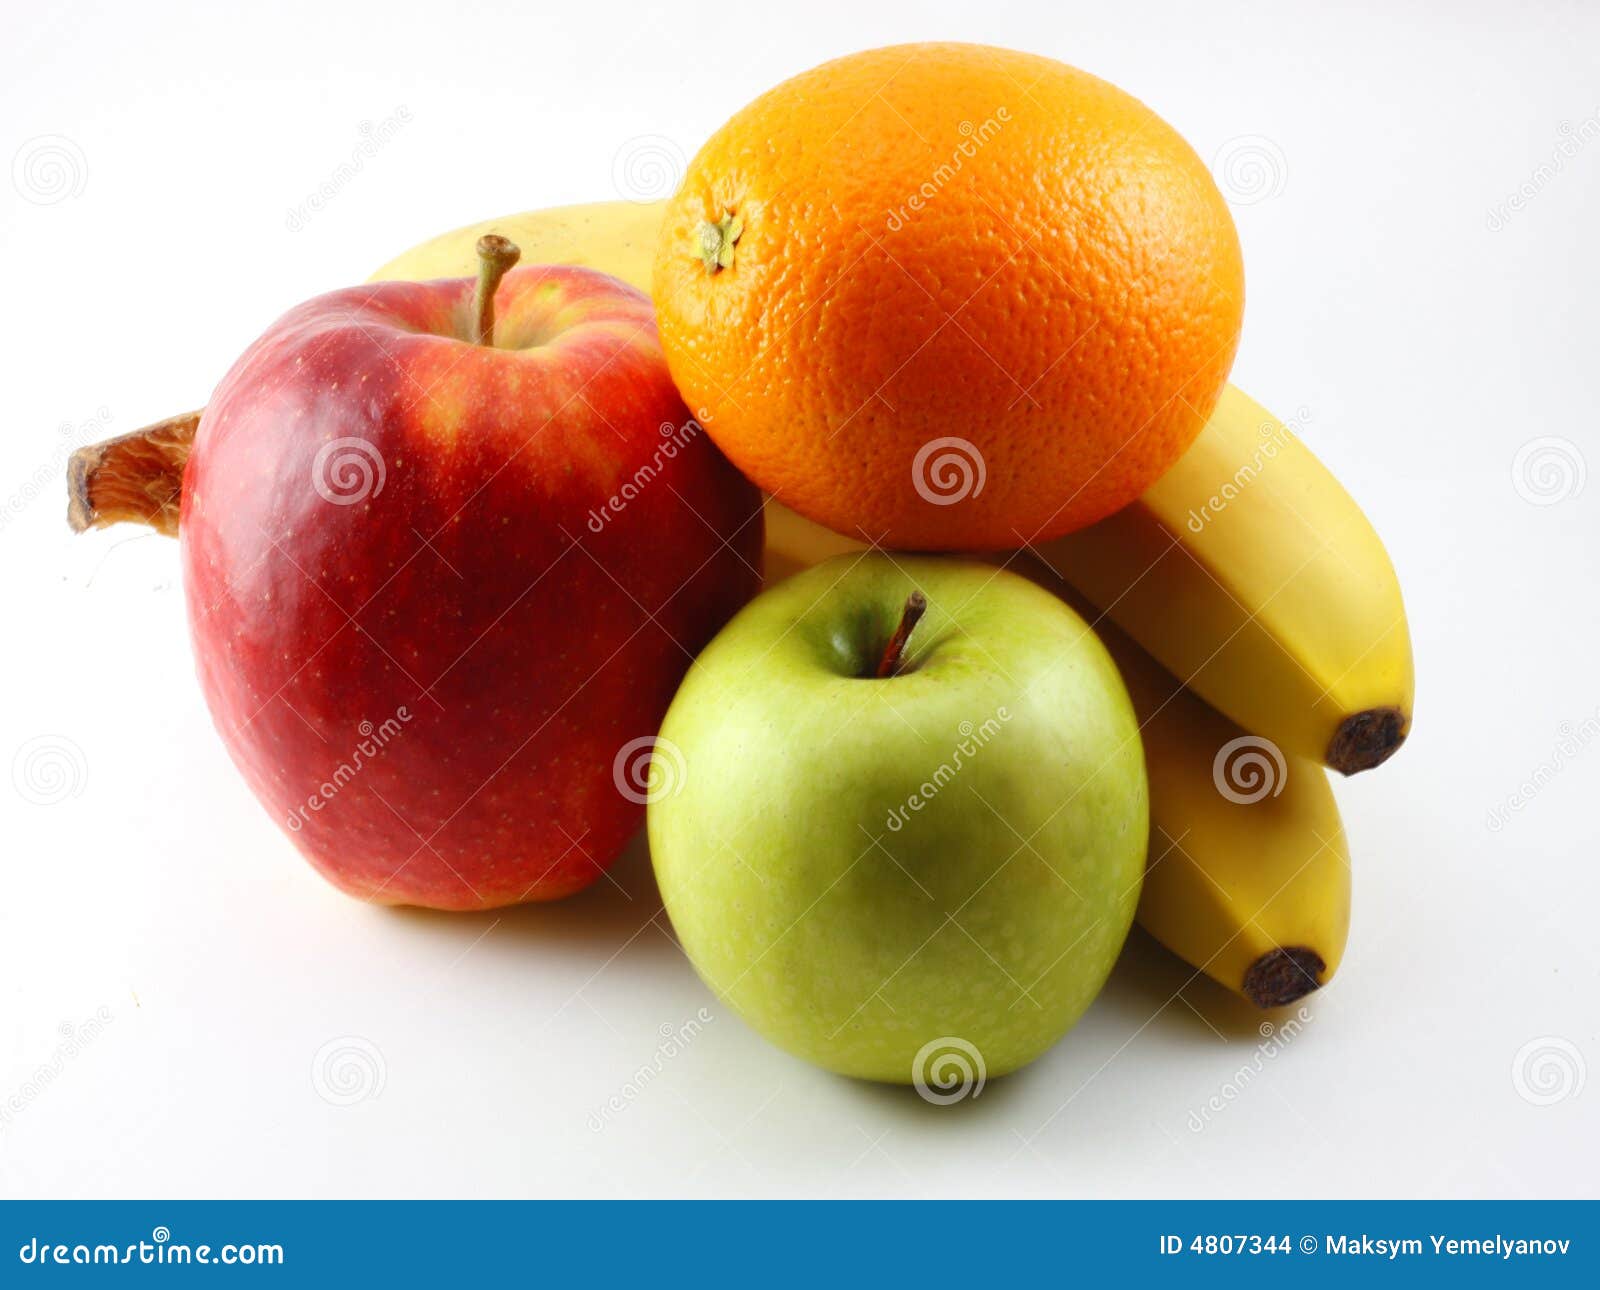 Apples Bananas And Orange Stock Photo Image Of Collection 4807344